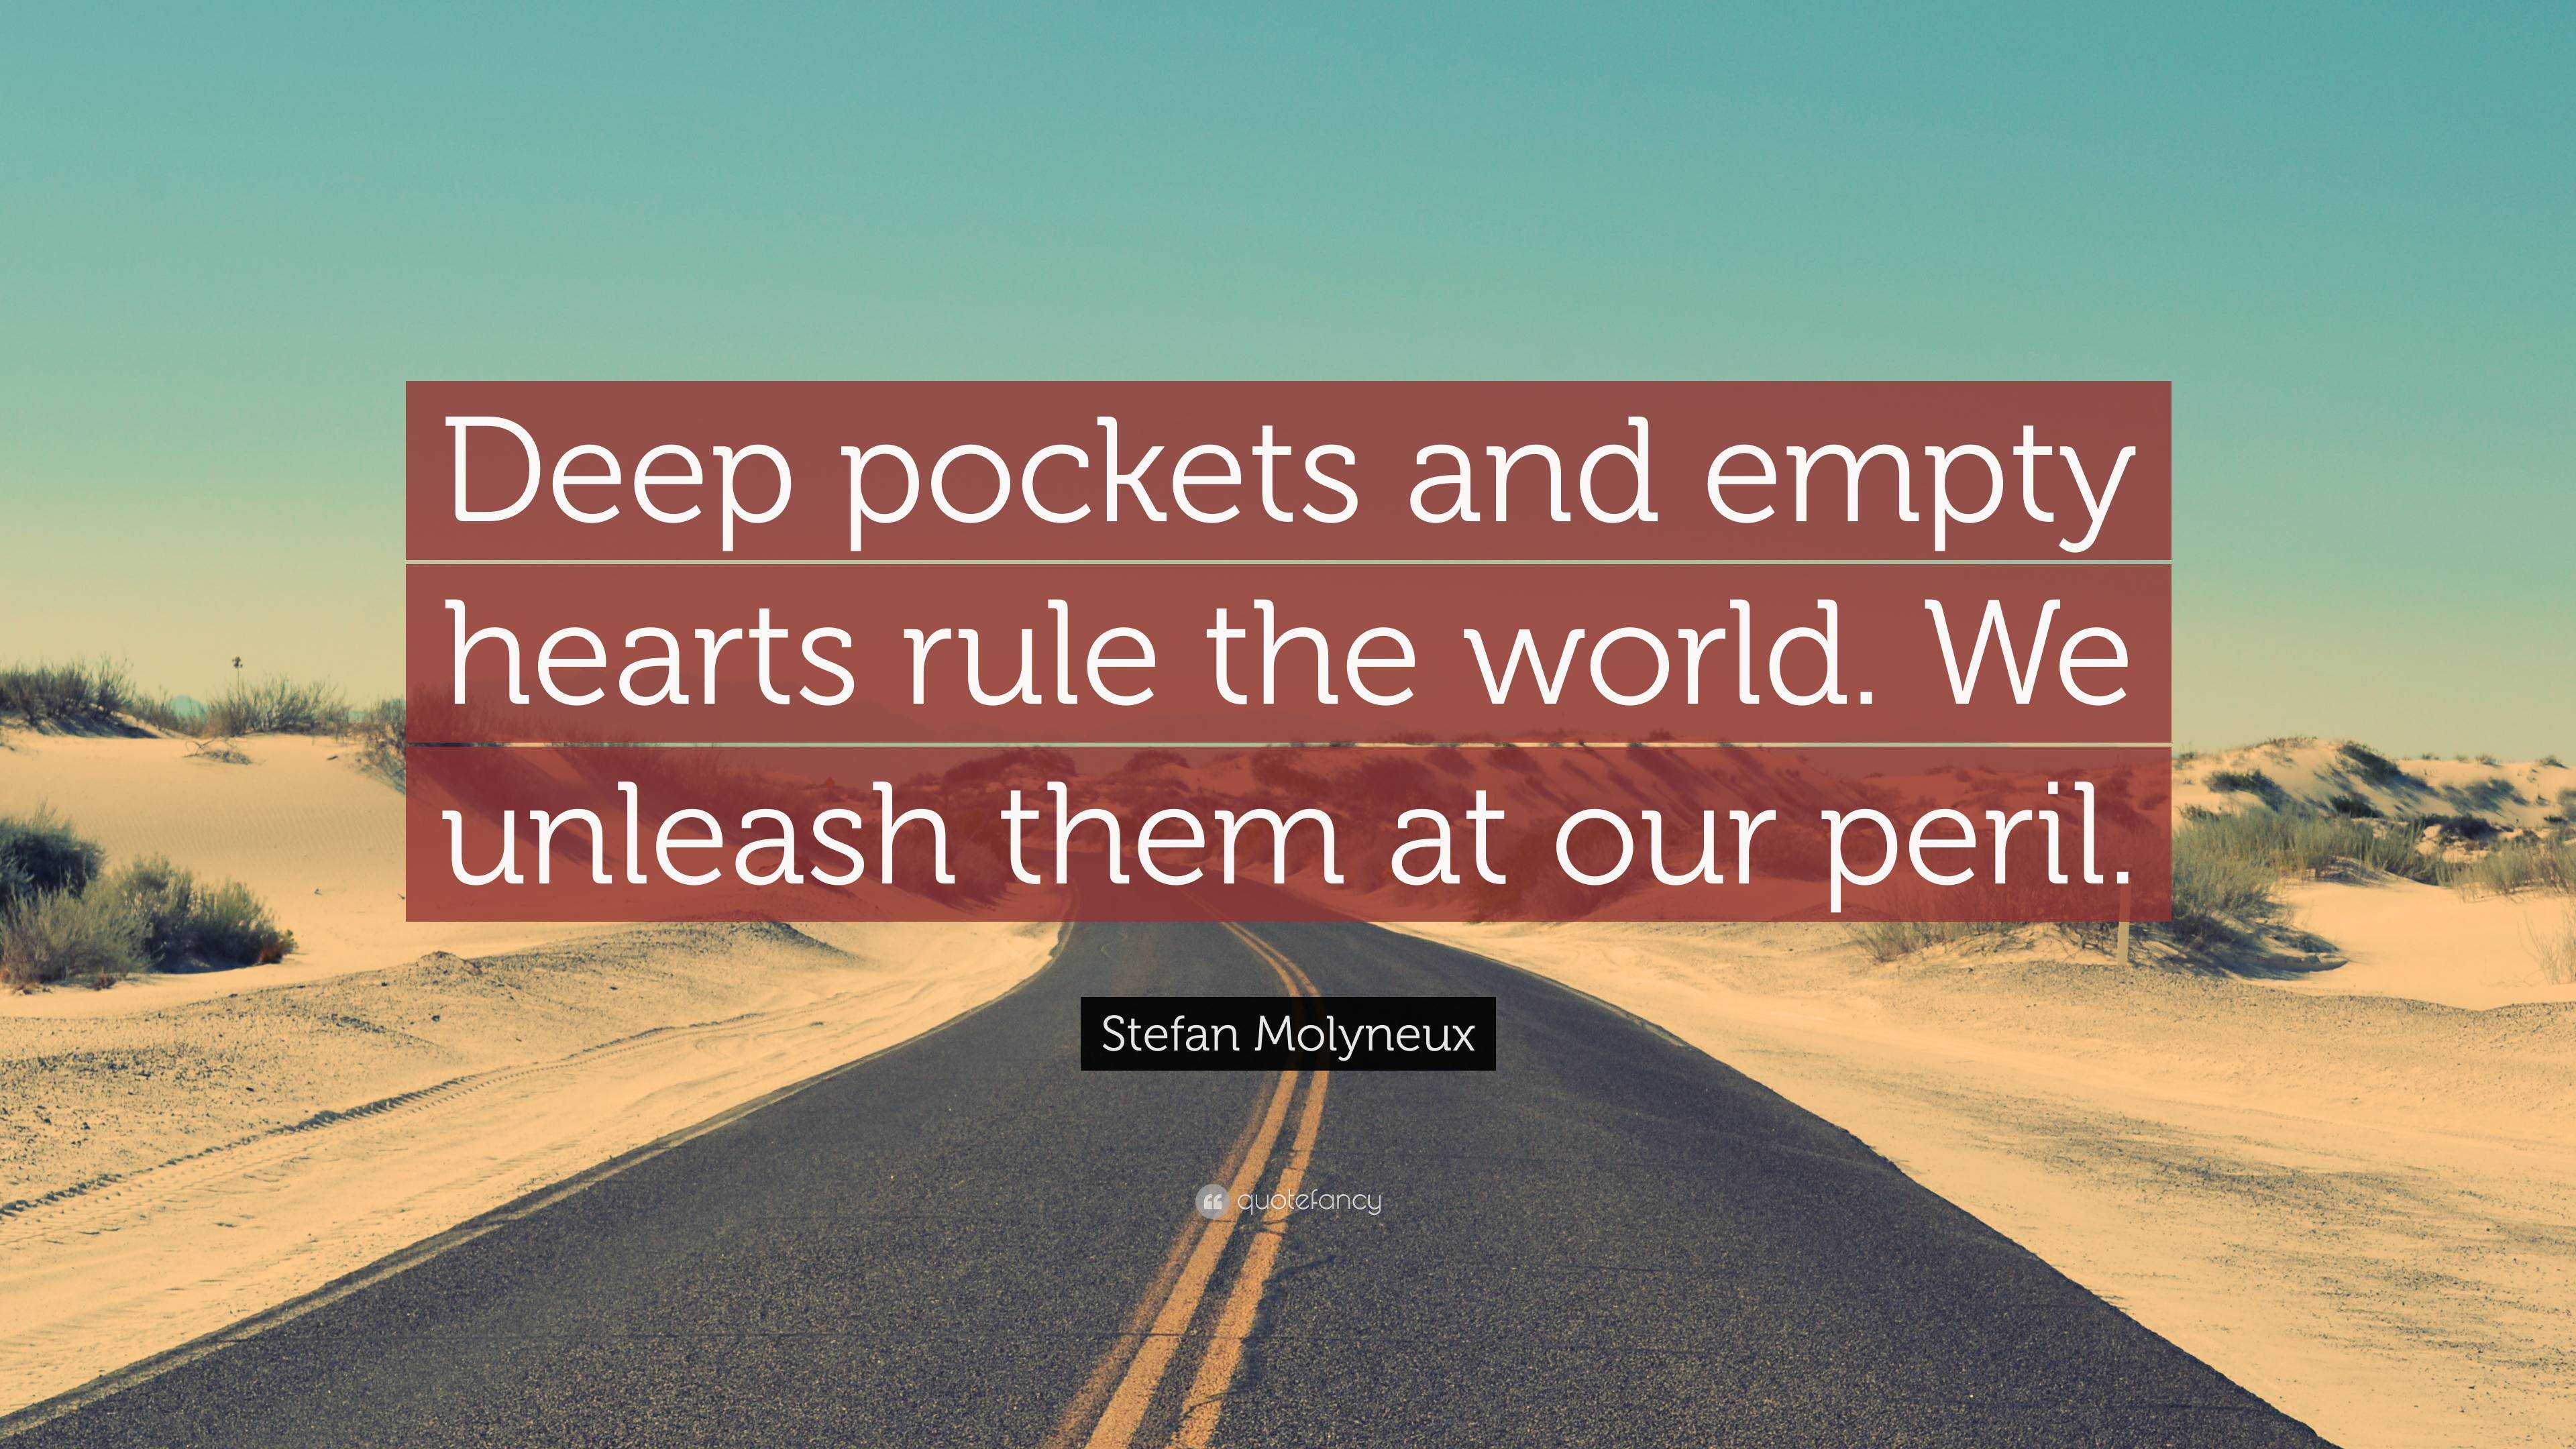 Stefan Molyneux Quote: “Deep pockets and empty hearts rule the